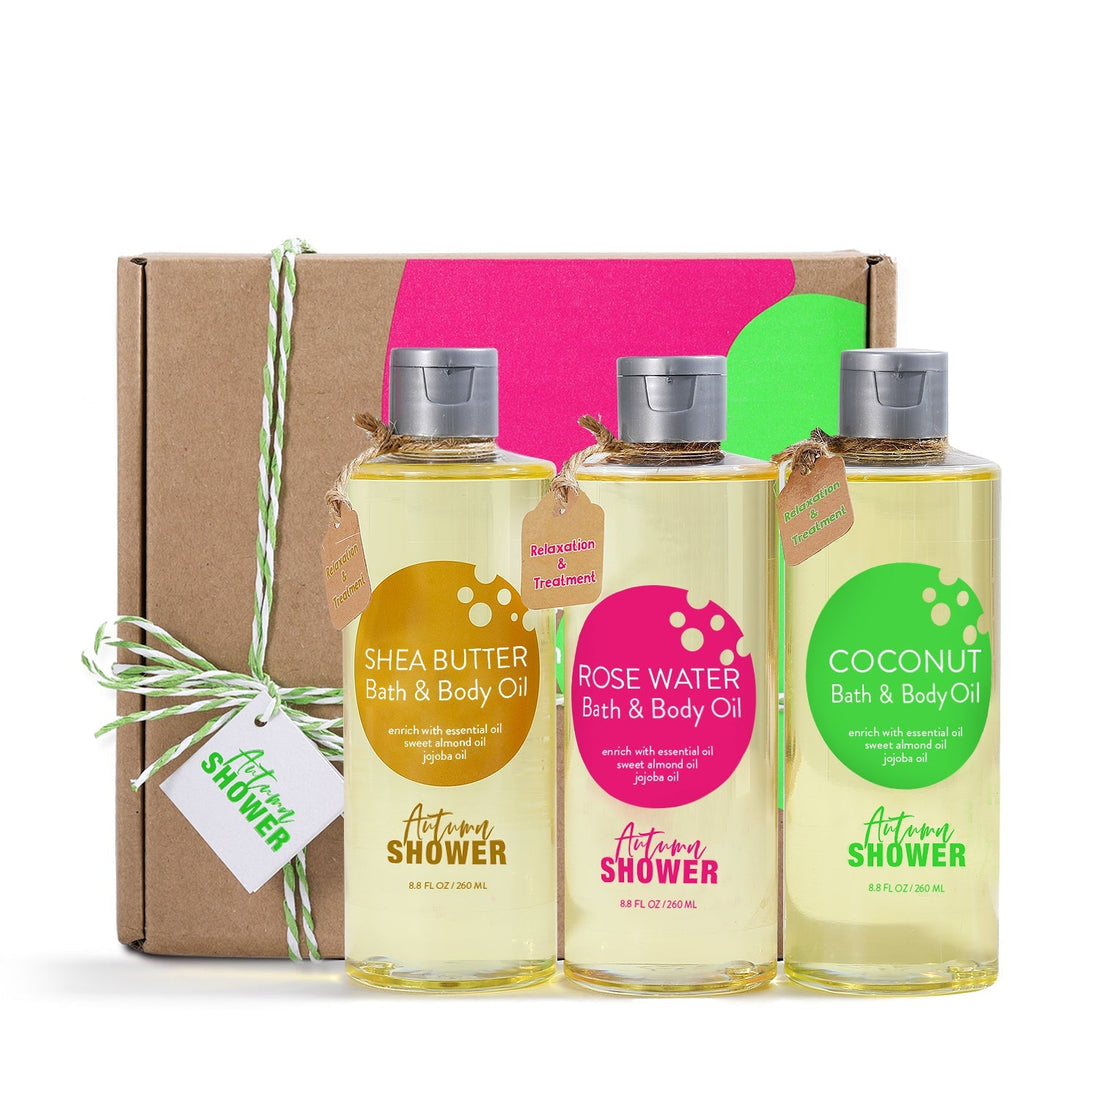 Autumn Shower Body Oil 3 Pack Bath and Body Oil